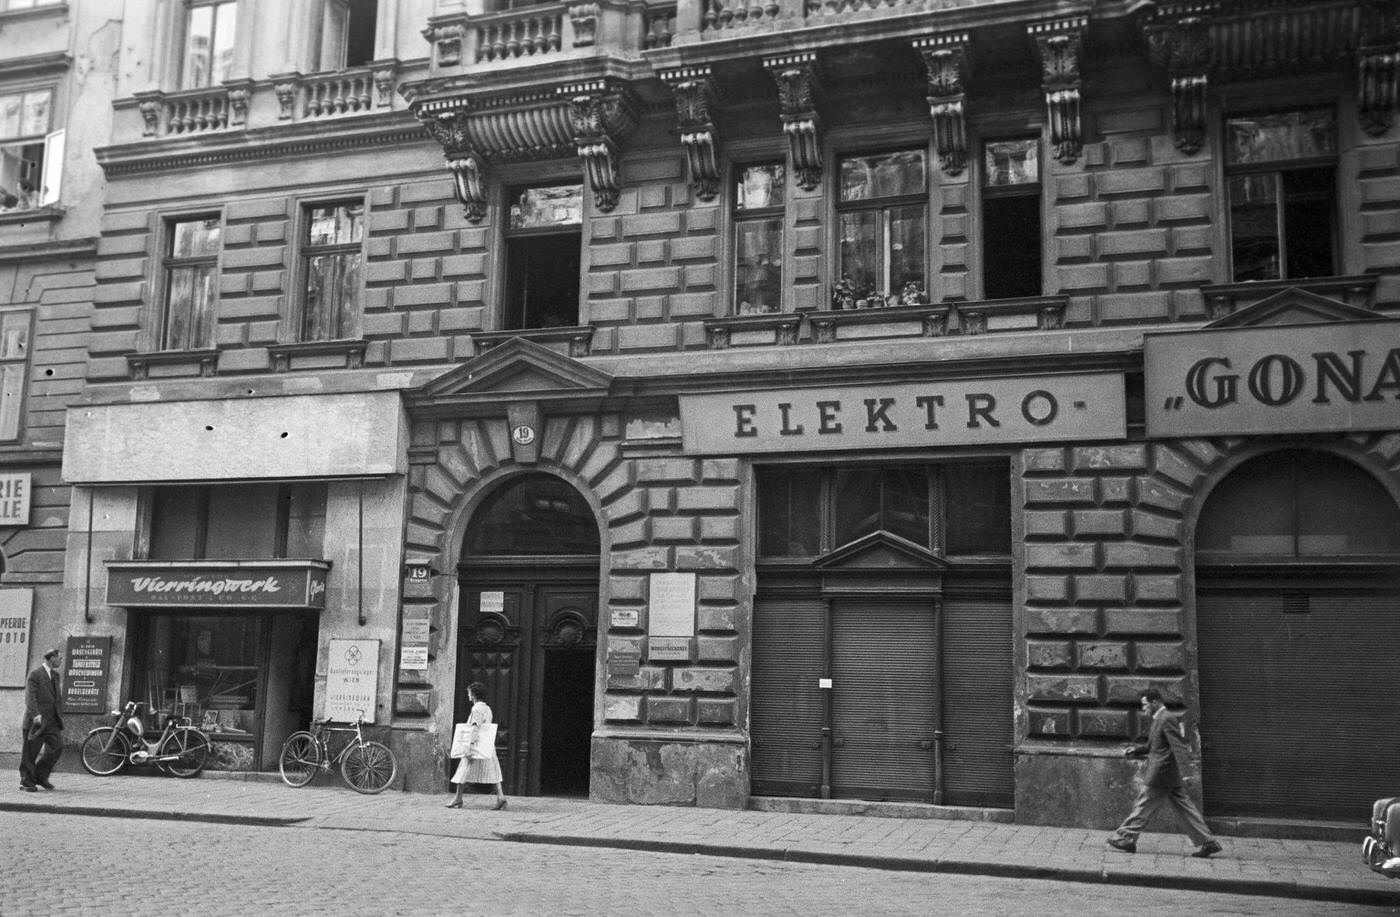 Entrance to the building of Sigmund Freud in Vienna, Austria in 1956.